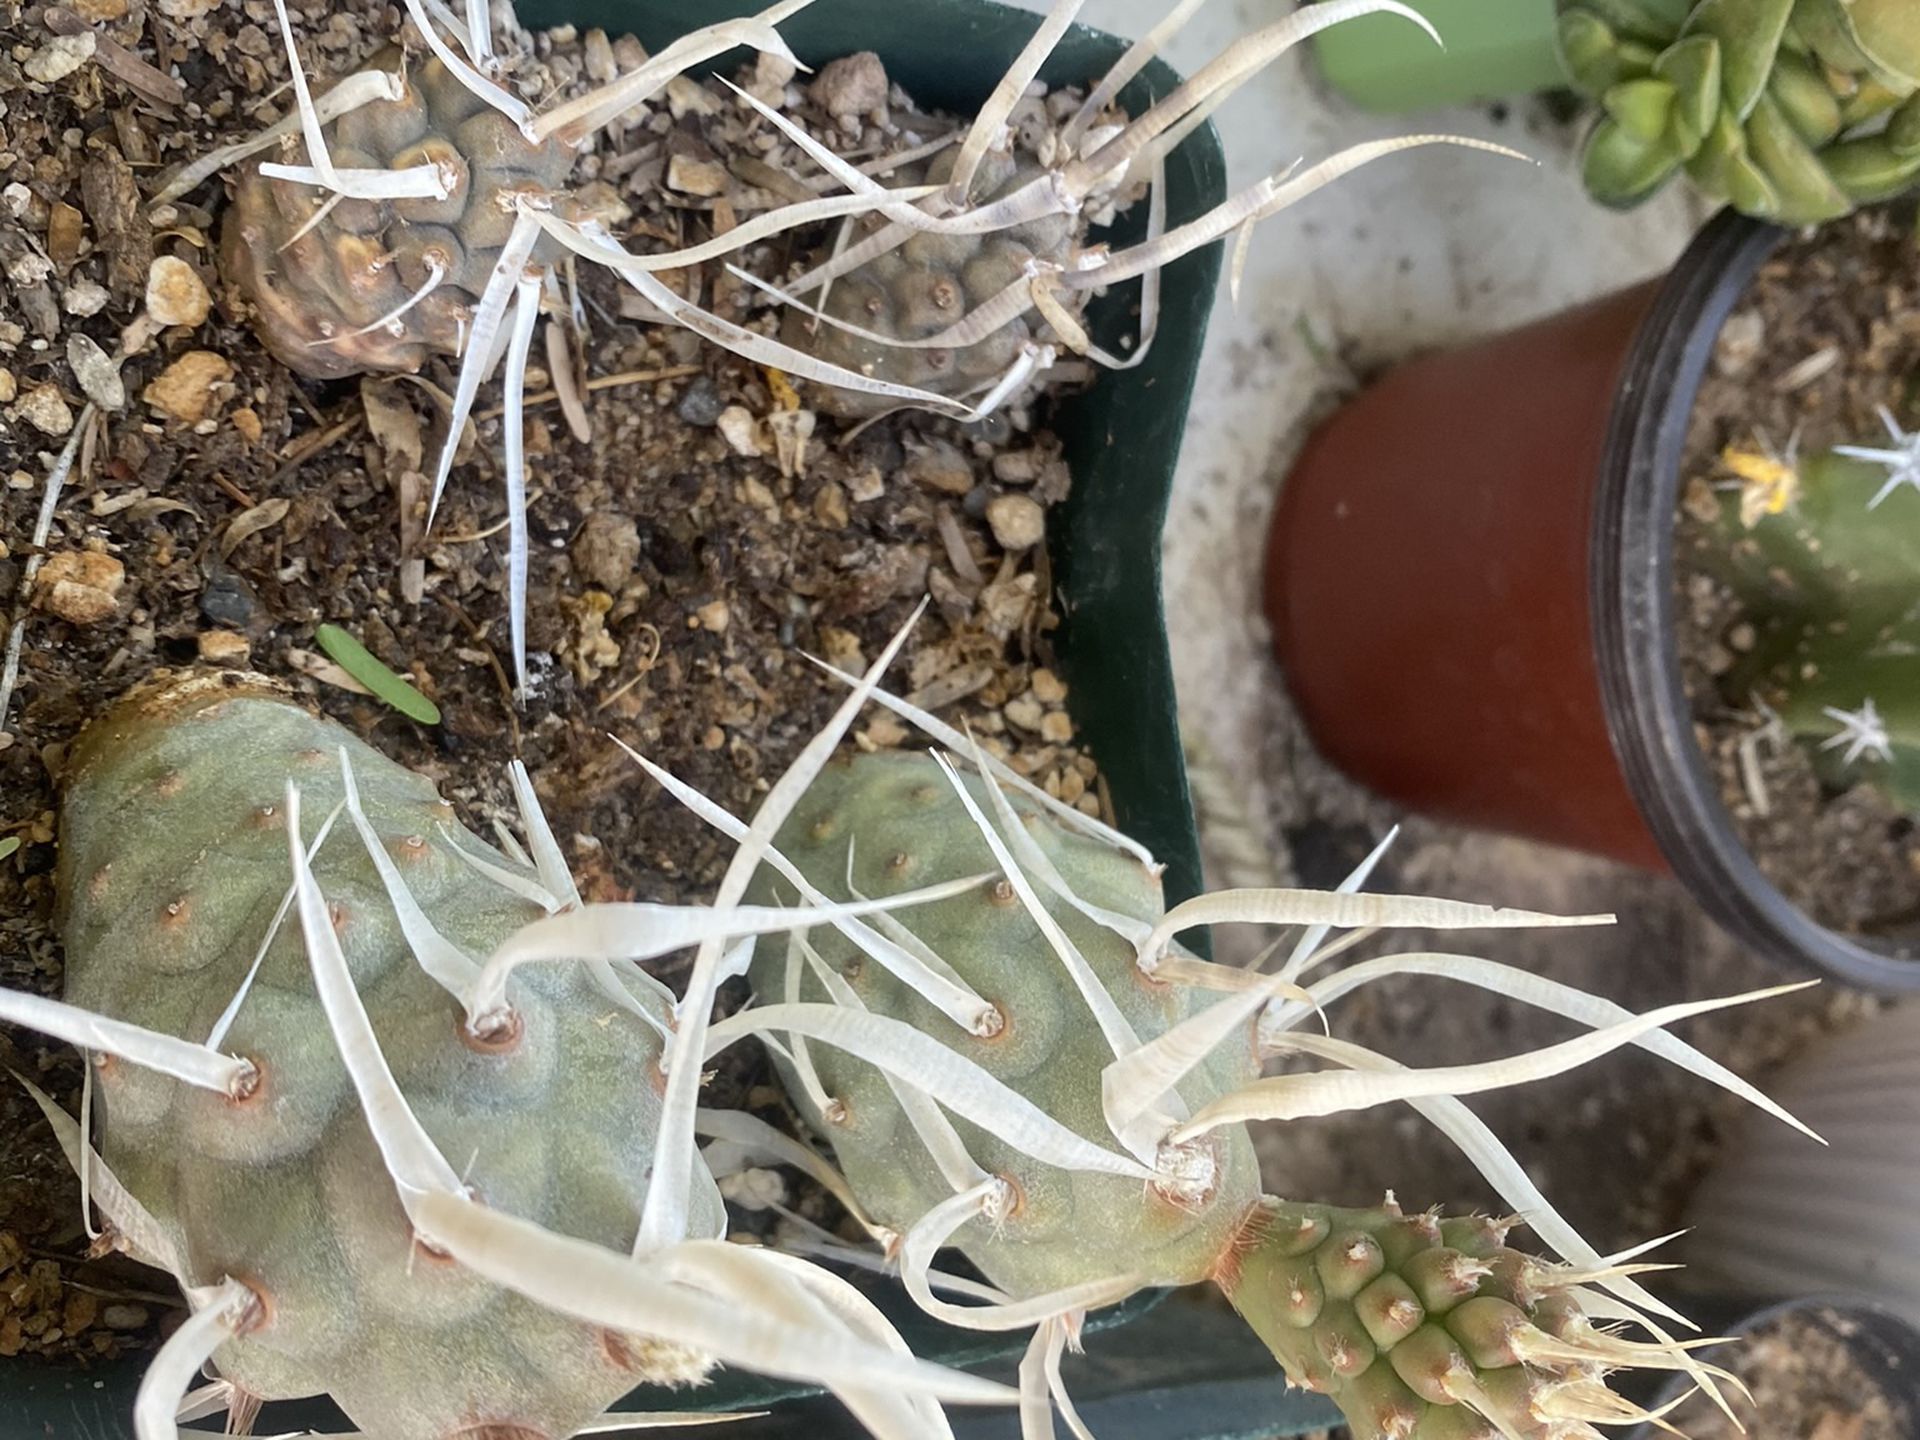 Potful Of 8 Rooted Tephrocactus Paper Spined